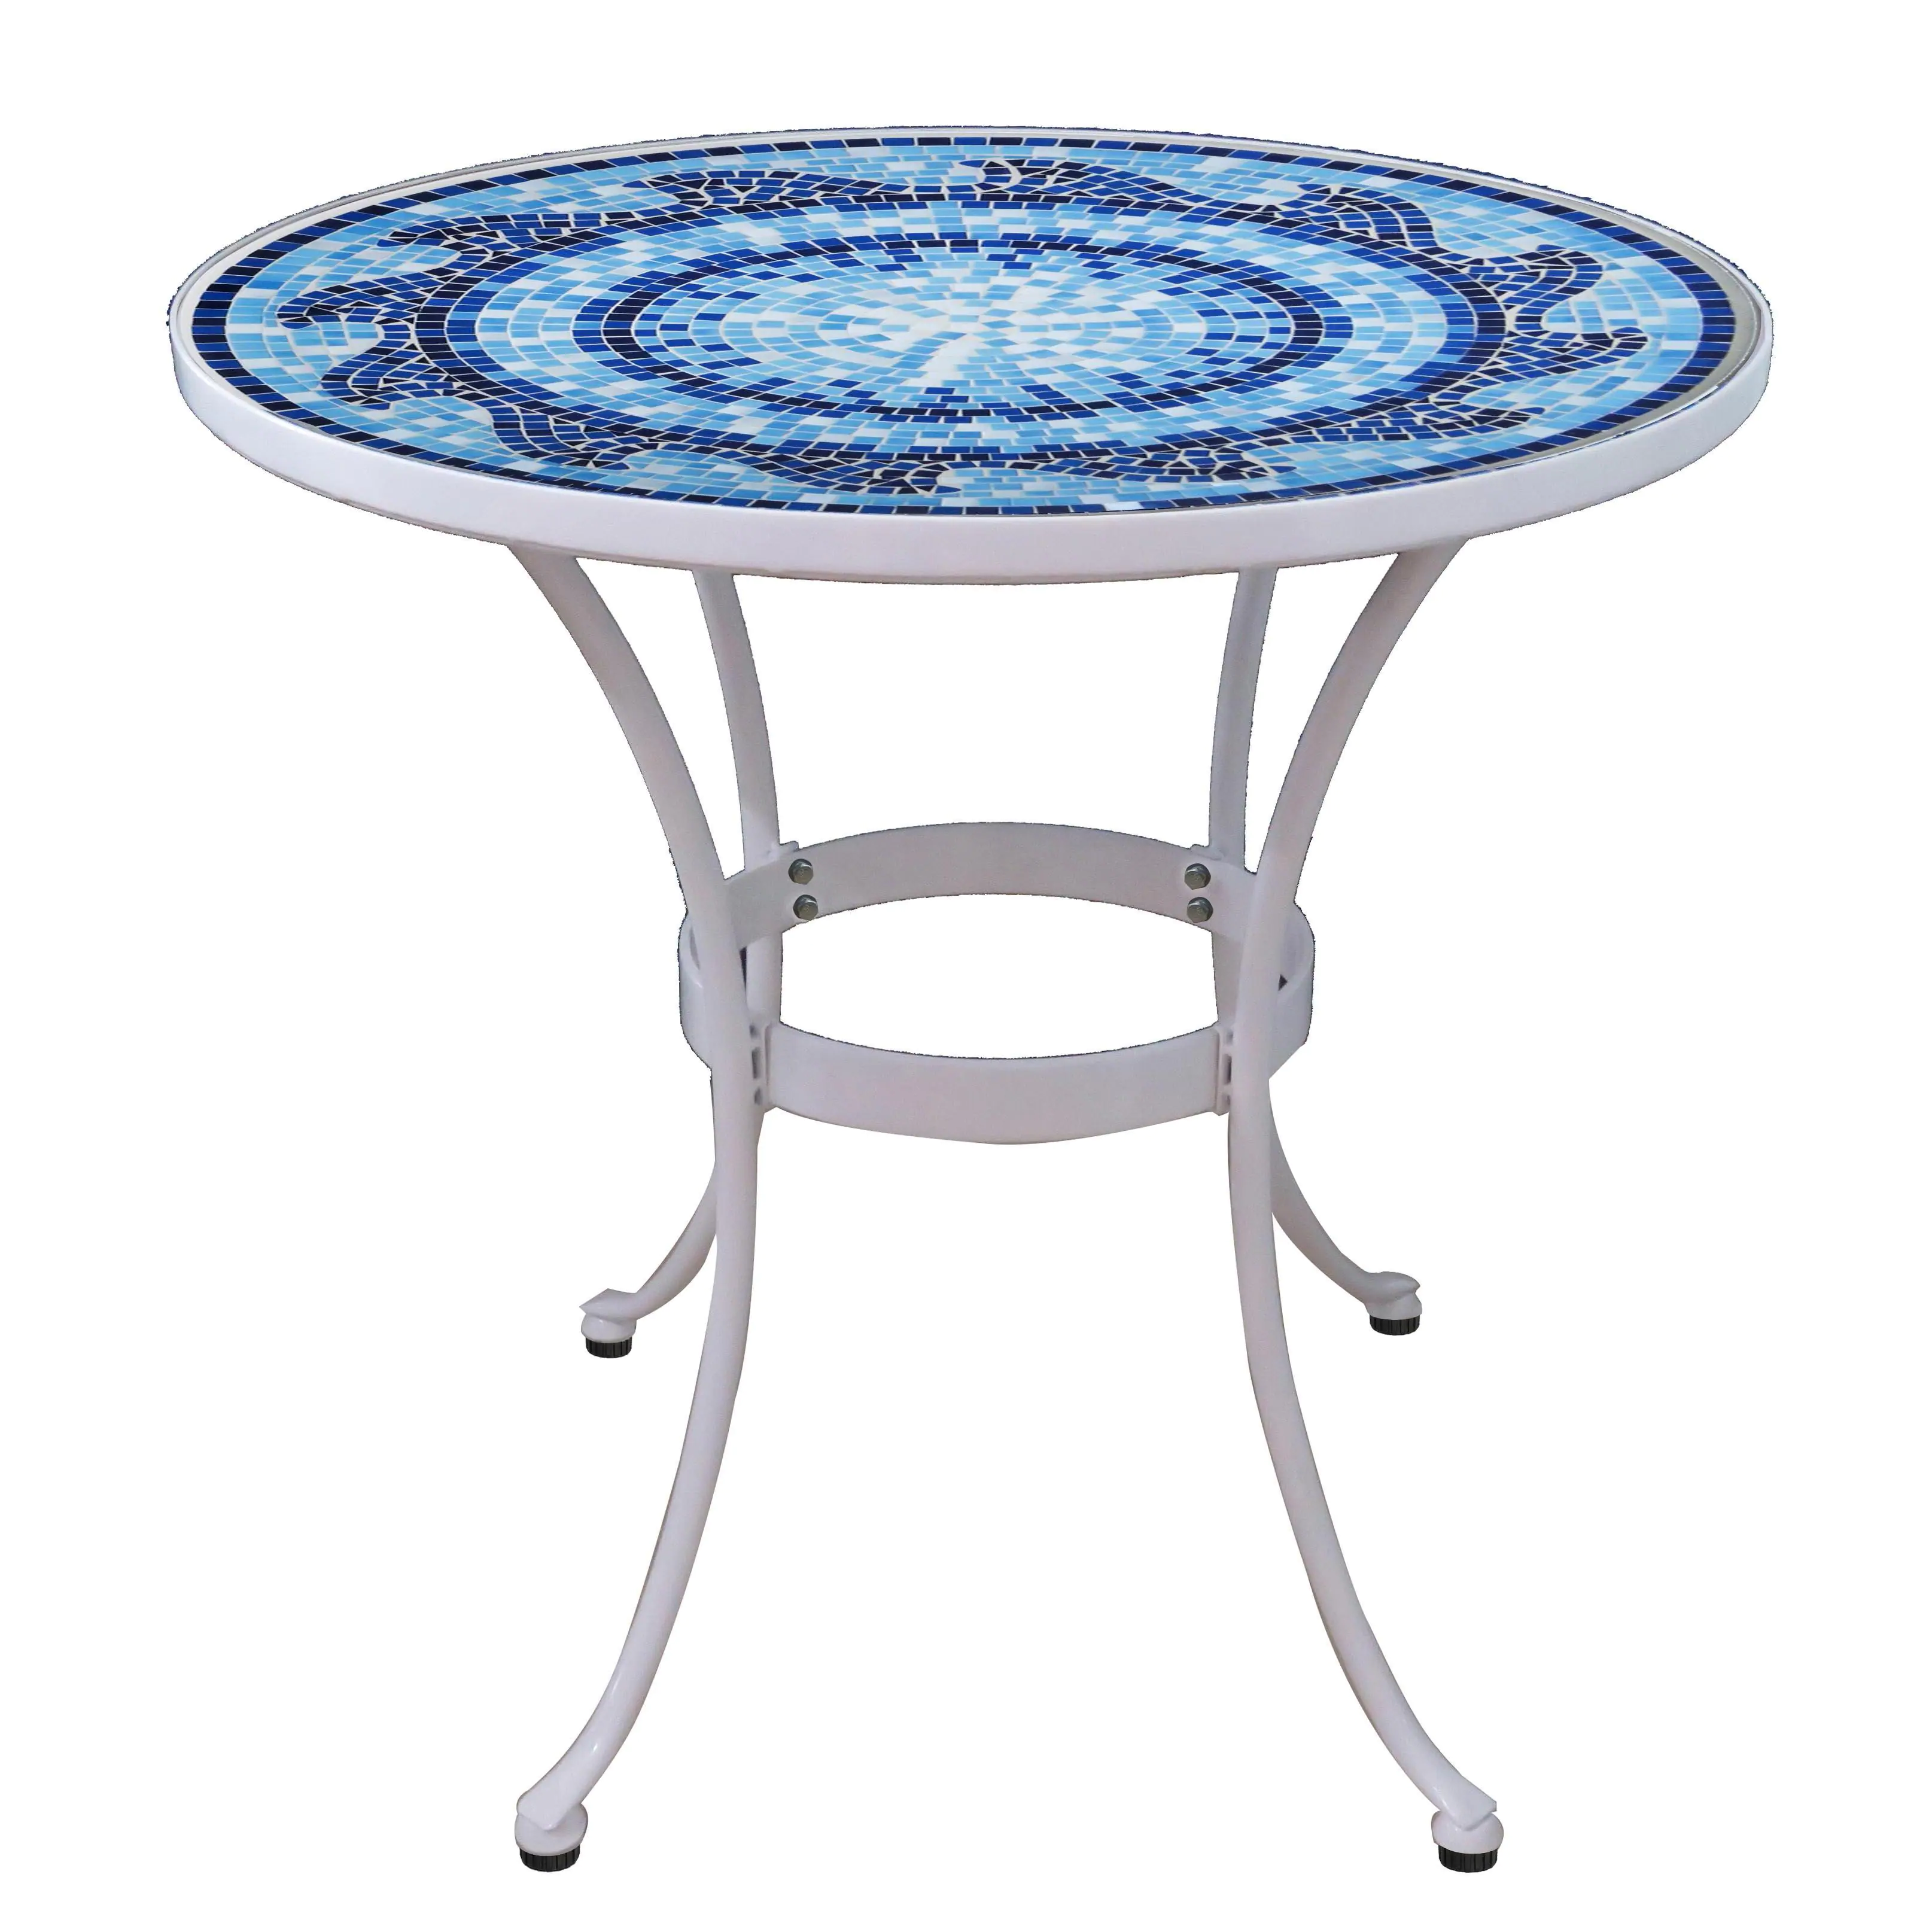 StyleWell 28 in. Coastal Glass Mosaic Outdoor Patio Bistro Table